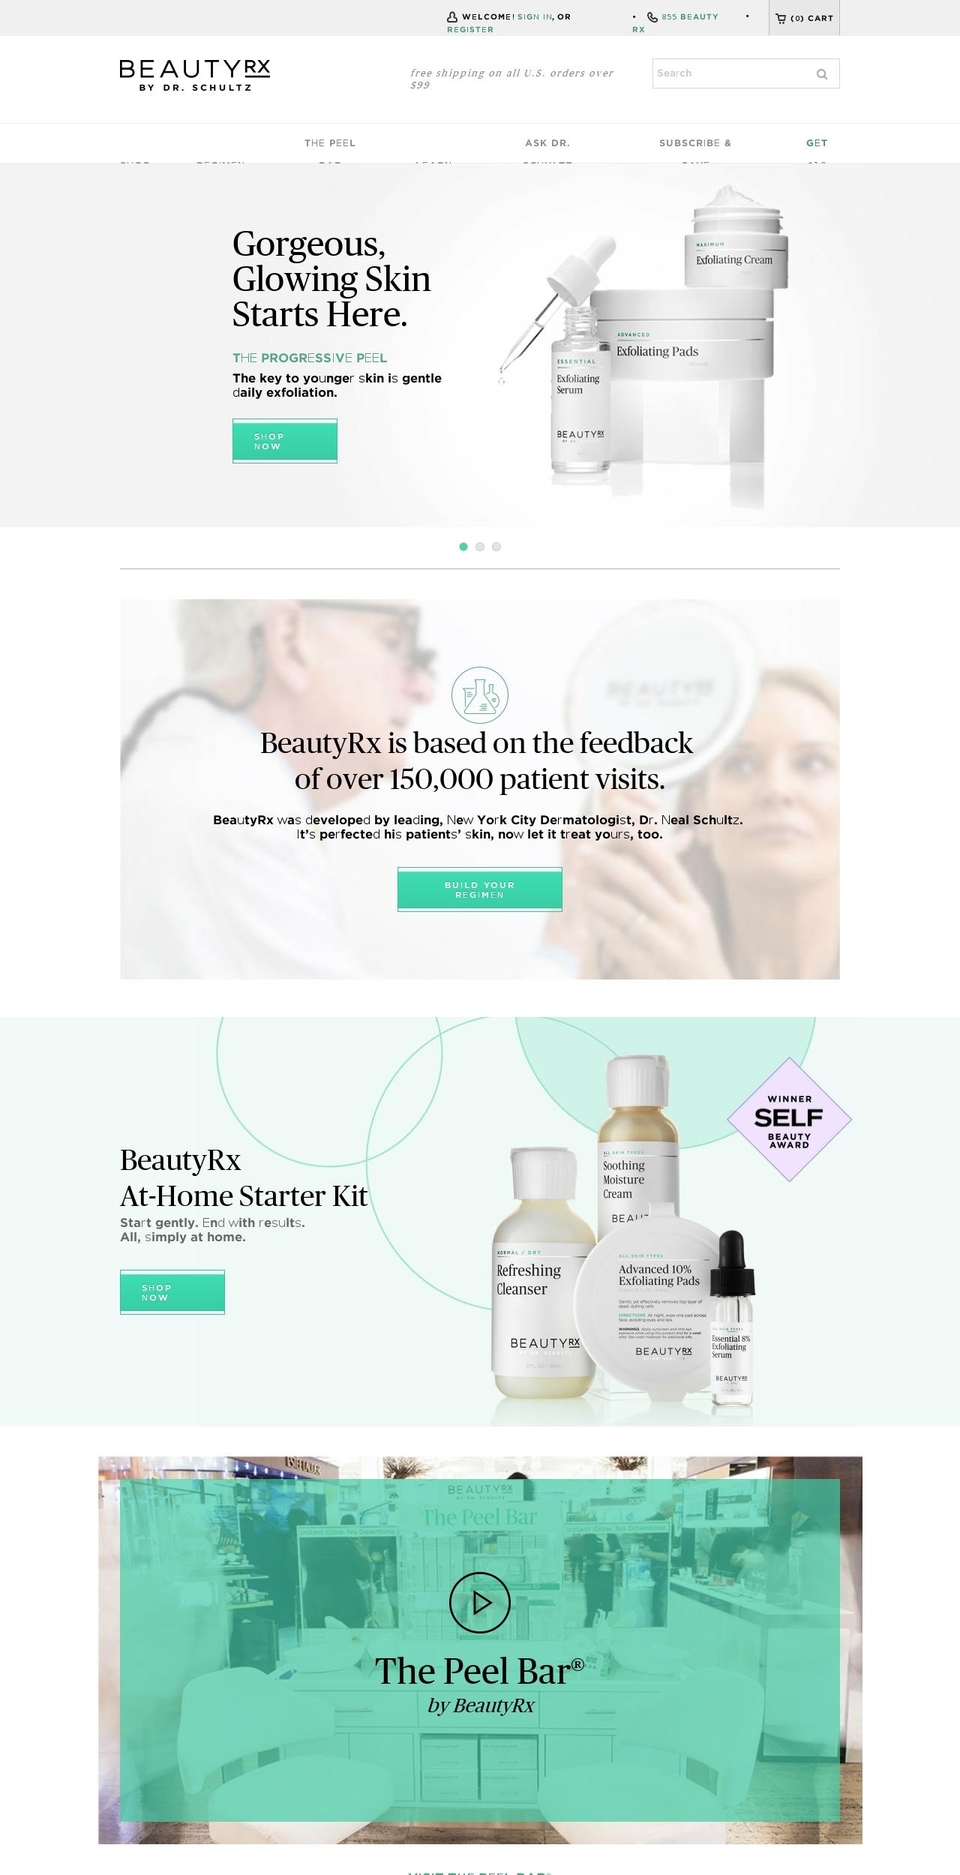 [Mob-20-Feb-18] Beauty RX [BR-248] Shopify theme site example beautyrx.co